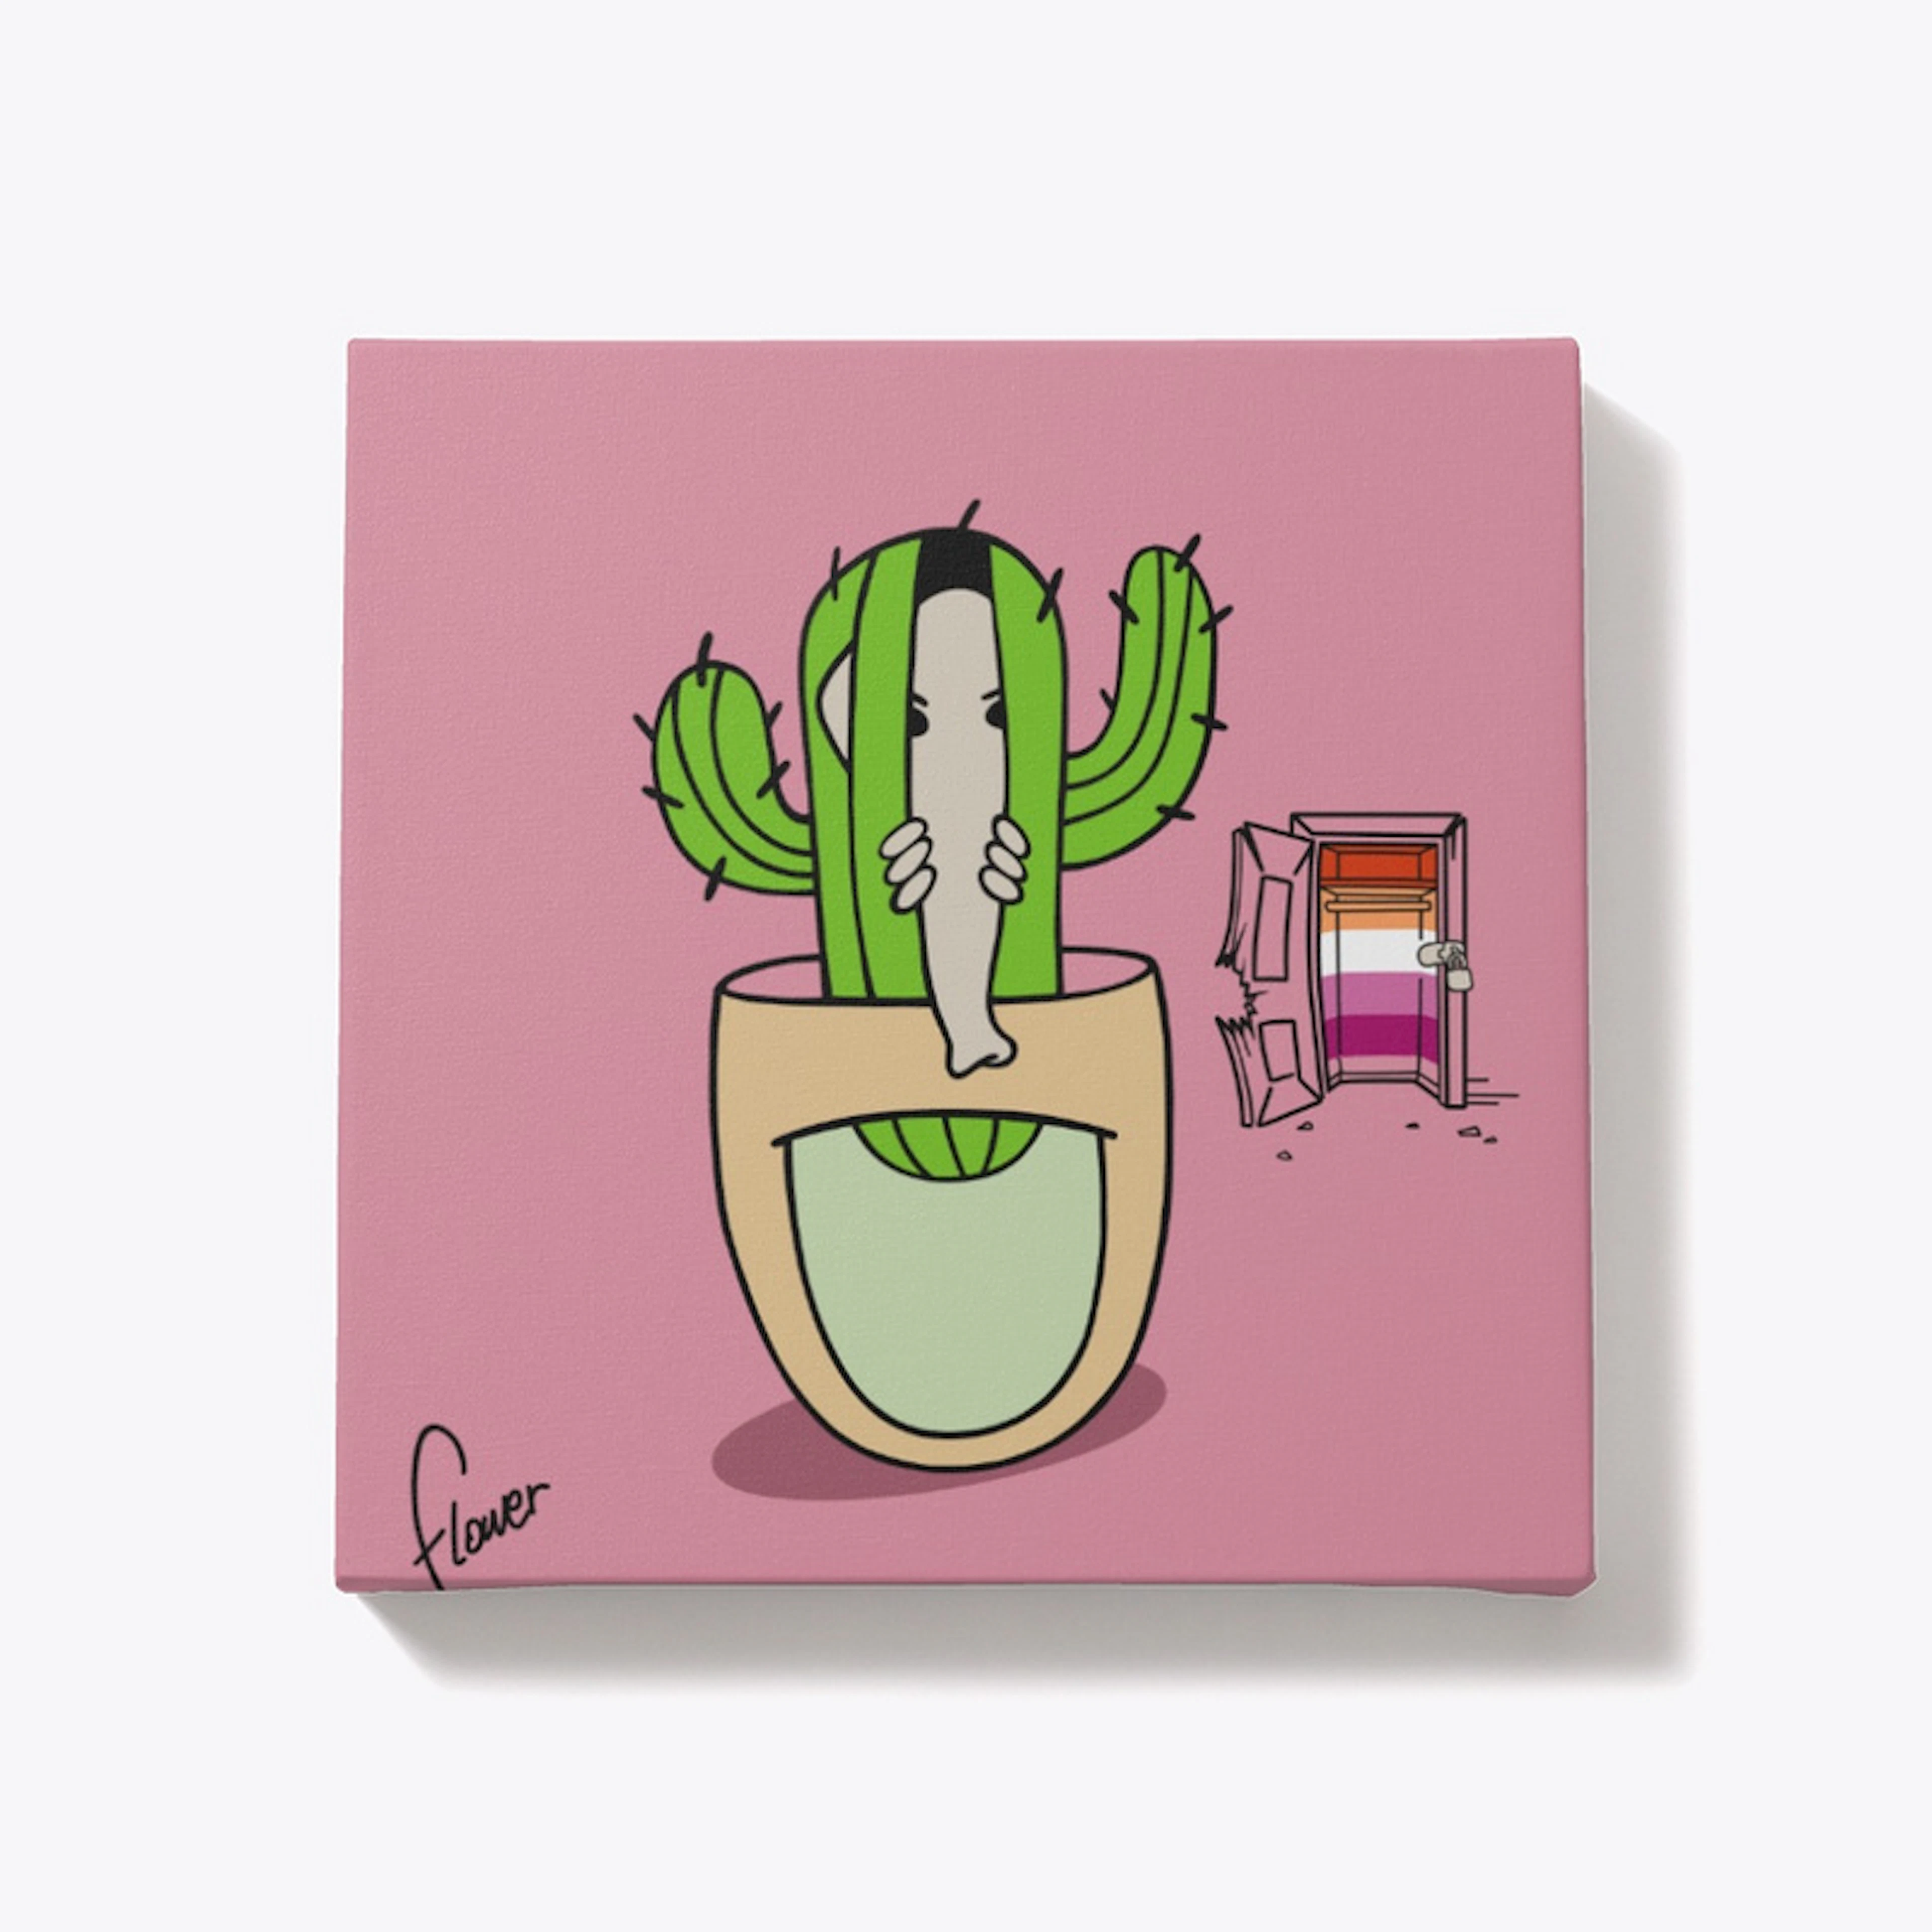  Lesbian Visibility. Cacti Collection